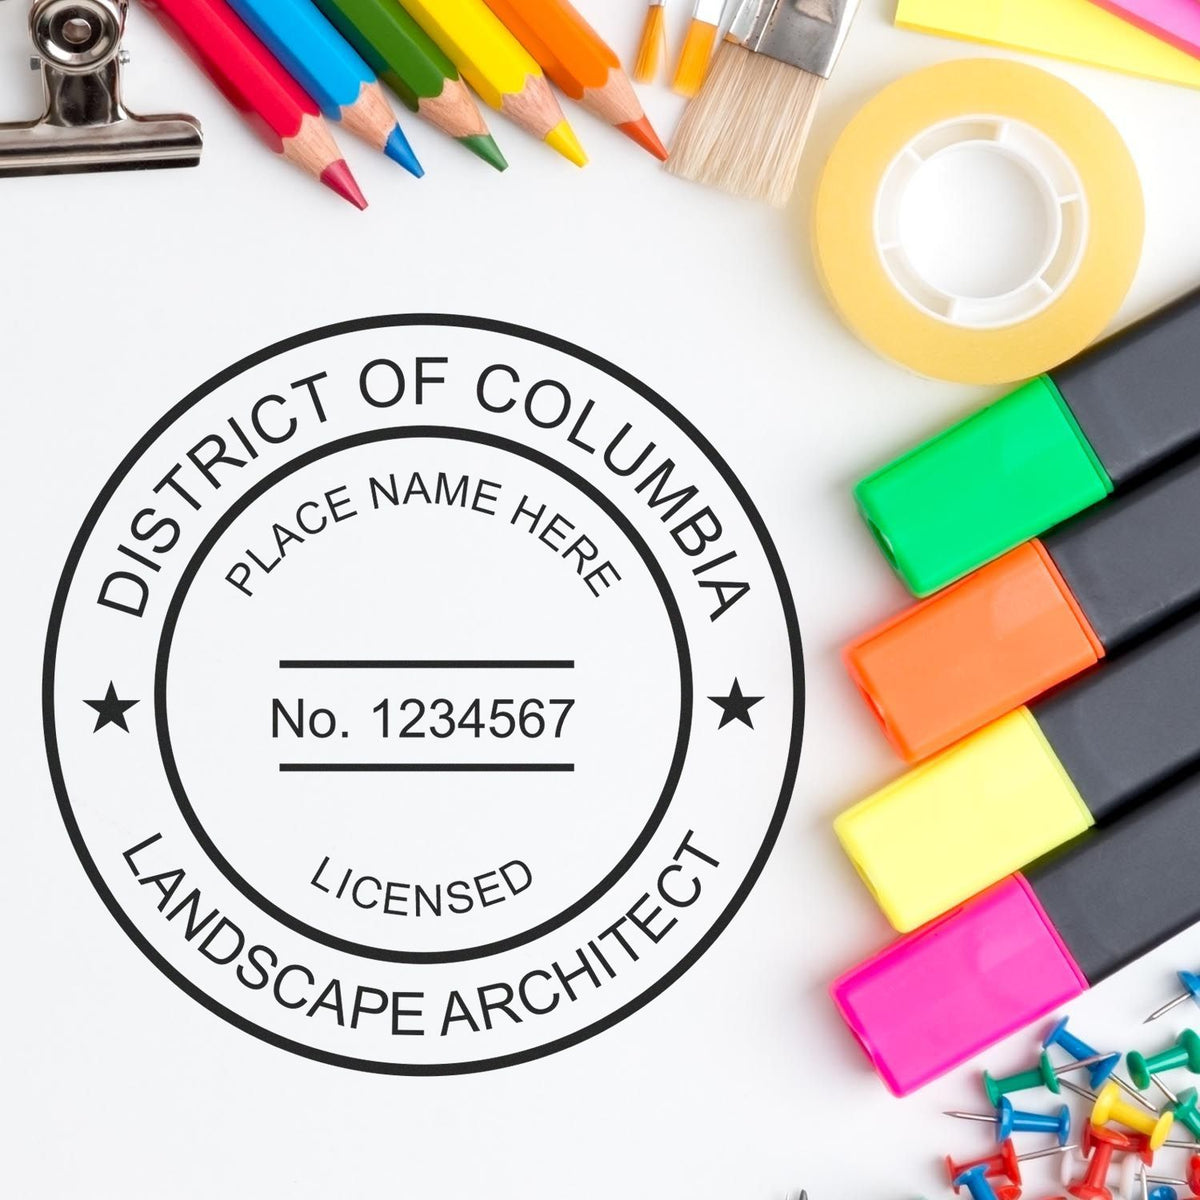 This paper is stamped with a sample imprint of the District of Columbia Landscape Architectural Seal Stamp, signifying its quality and reliability.